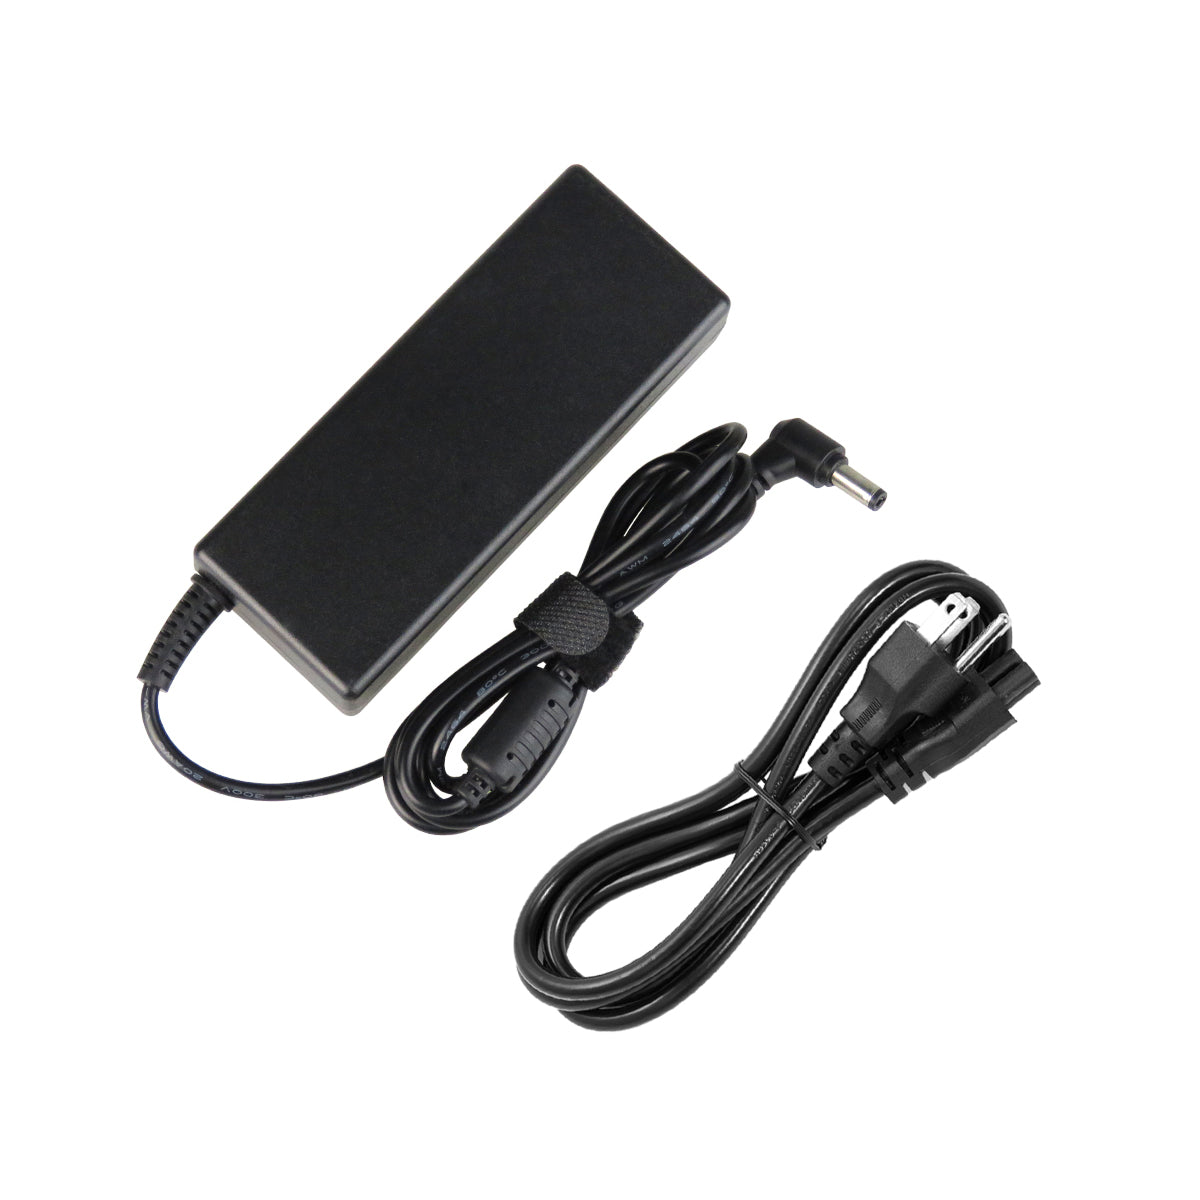 AC Adapter Charger for ASUS A8E Notebook.